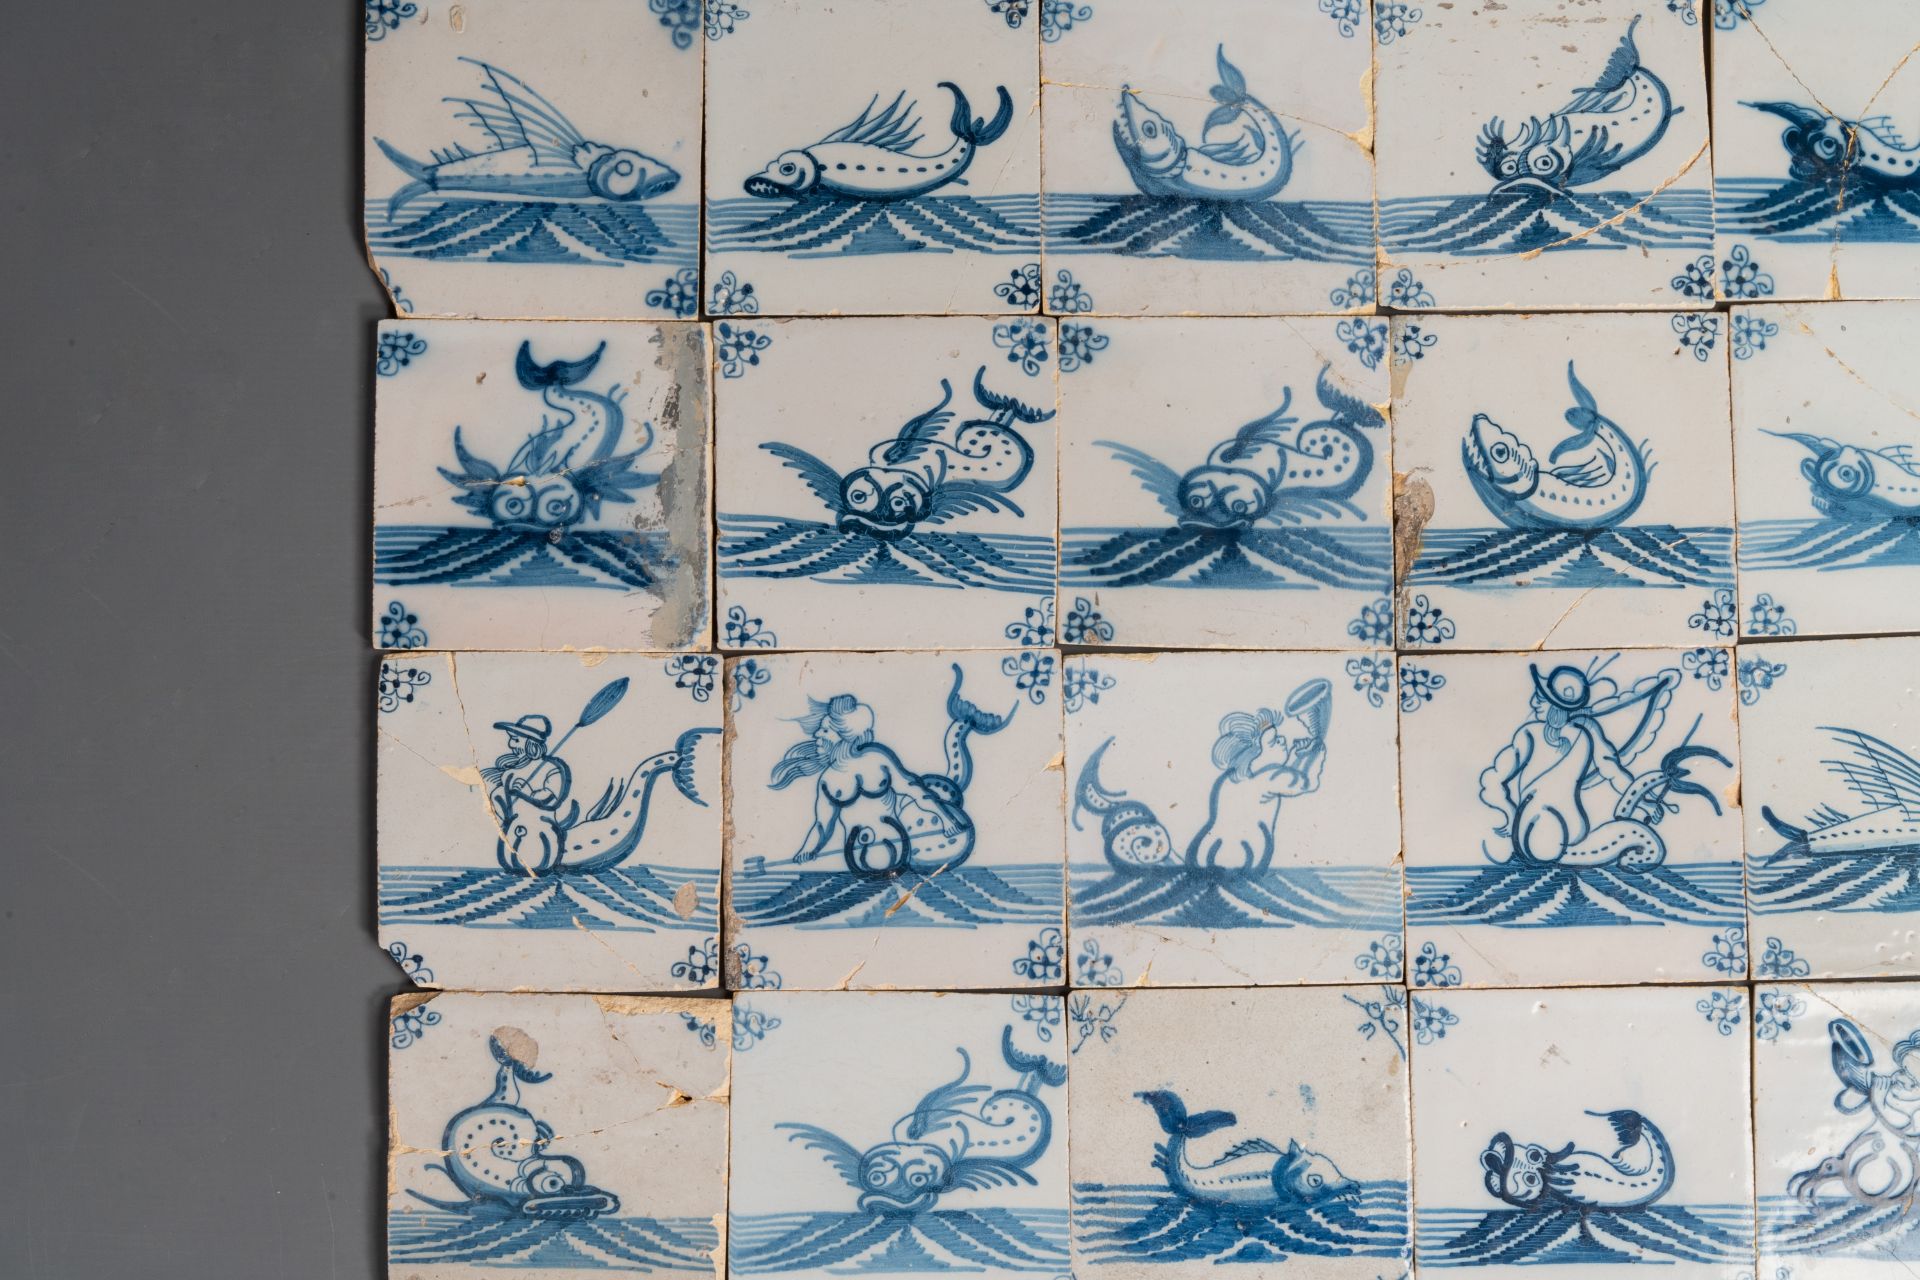 92 blue and white Dutch Delft tiles with sea monsters and ships, 18th C. - Bild 6 aus 16